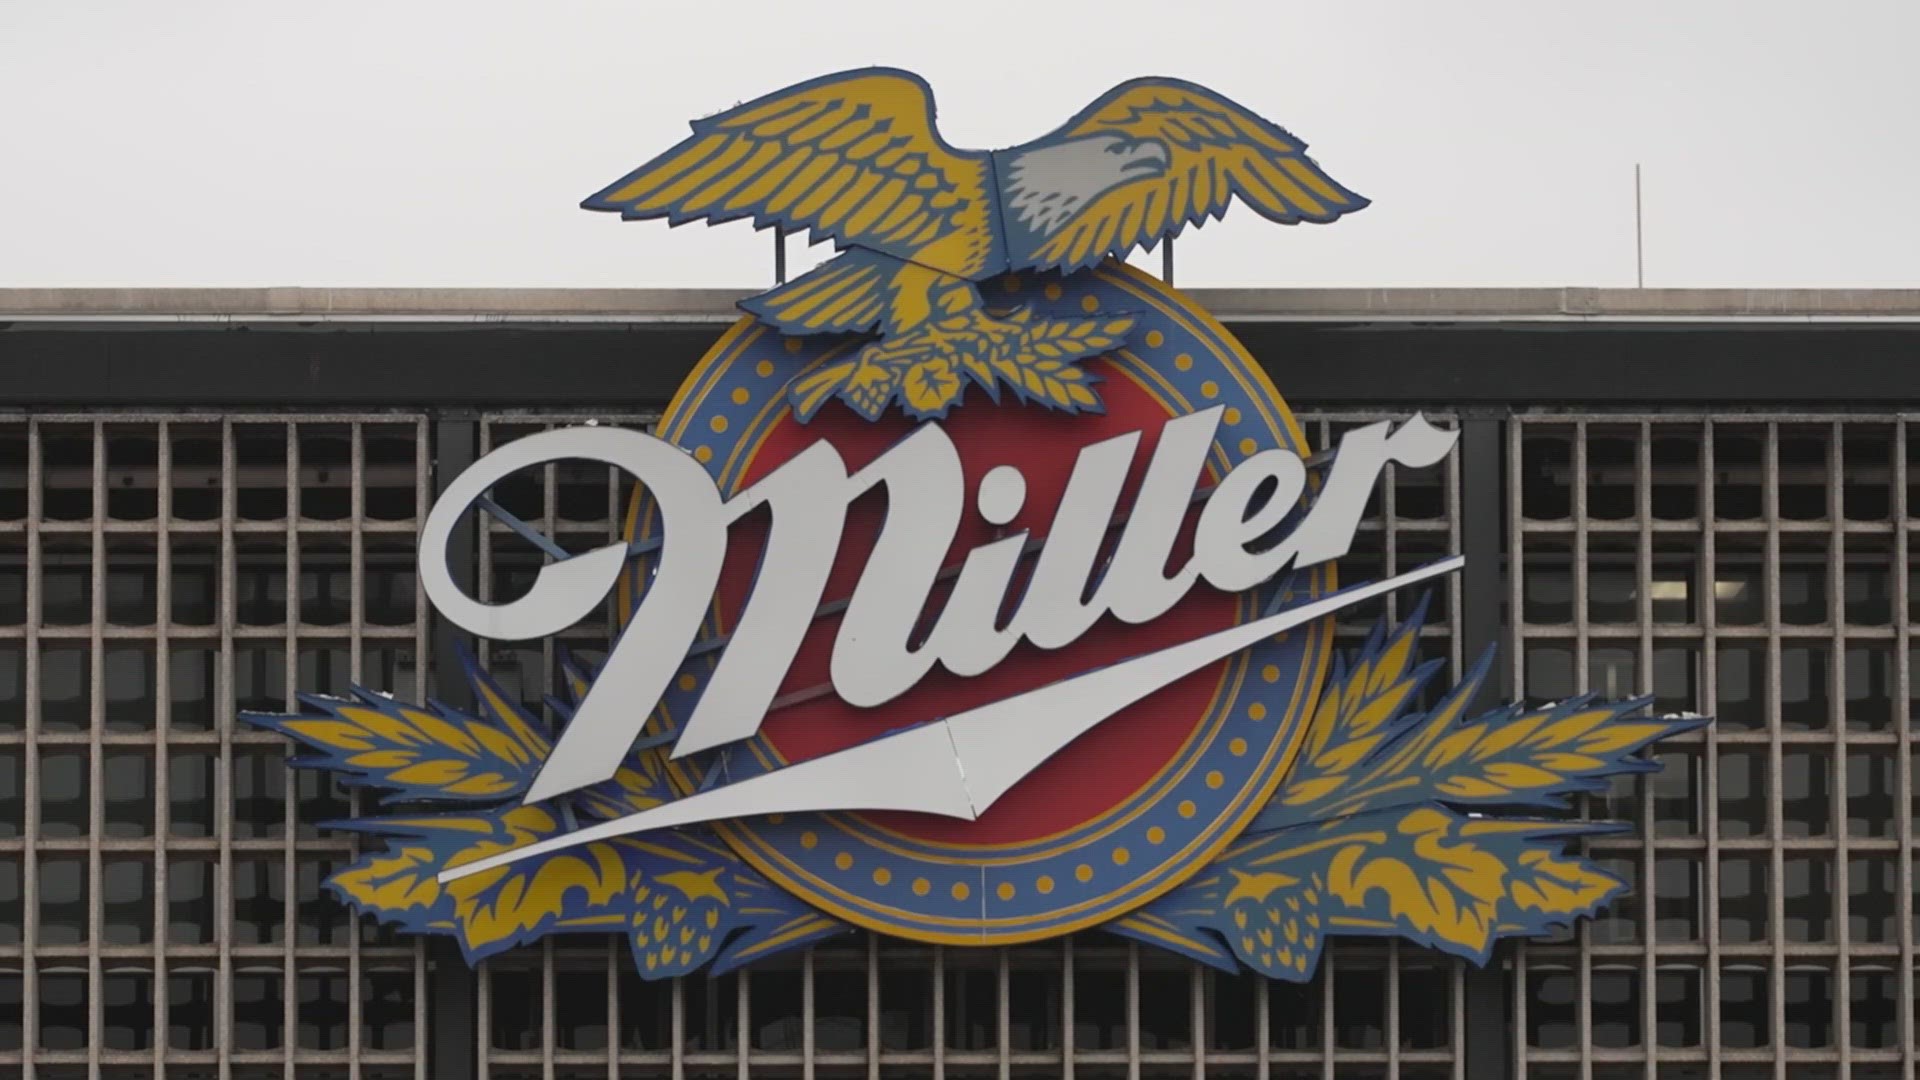 Among the products produced at the Fort Worth site include: Miller Lite, Coors Light, Yuengling, PBR and Topo Chico.